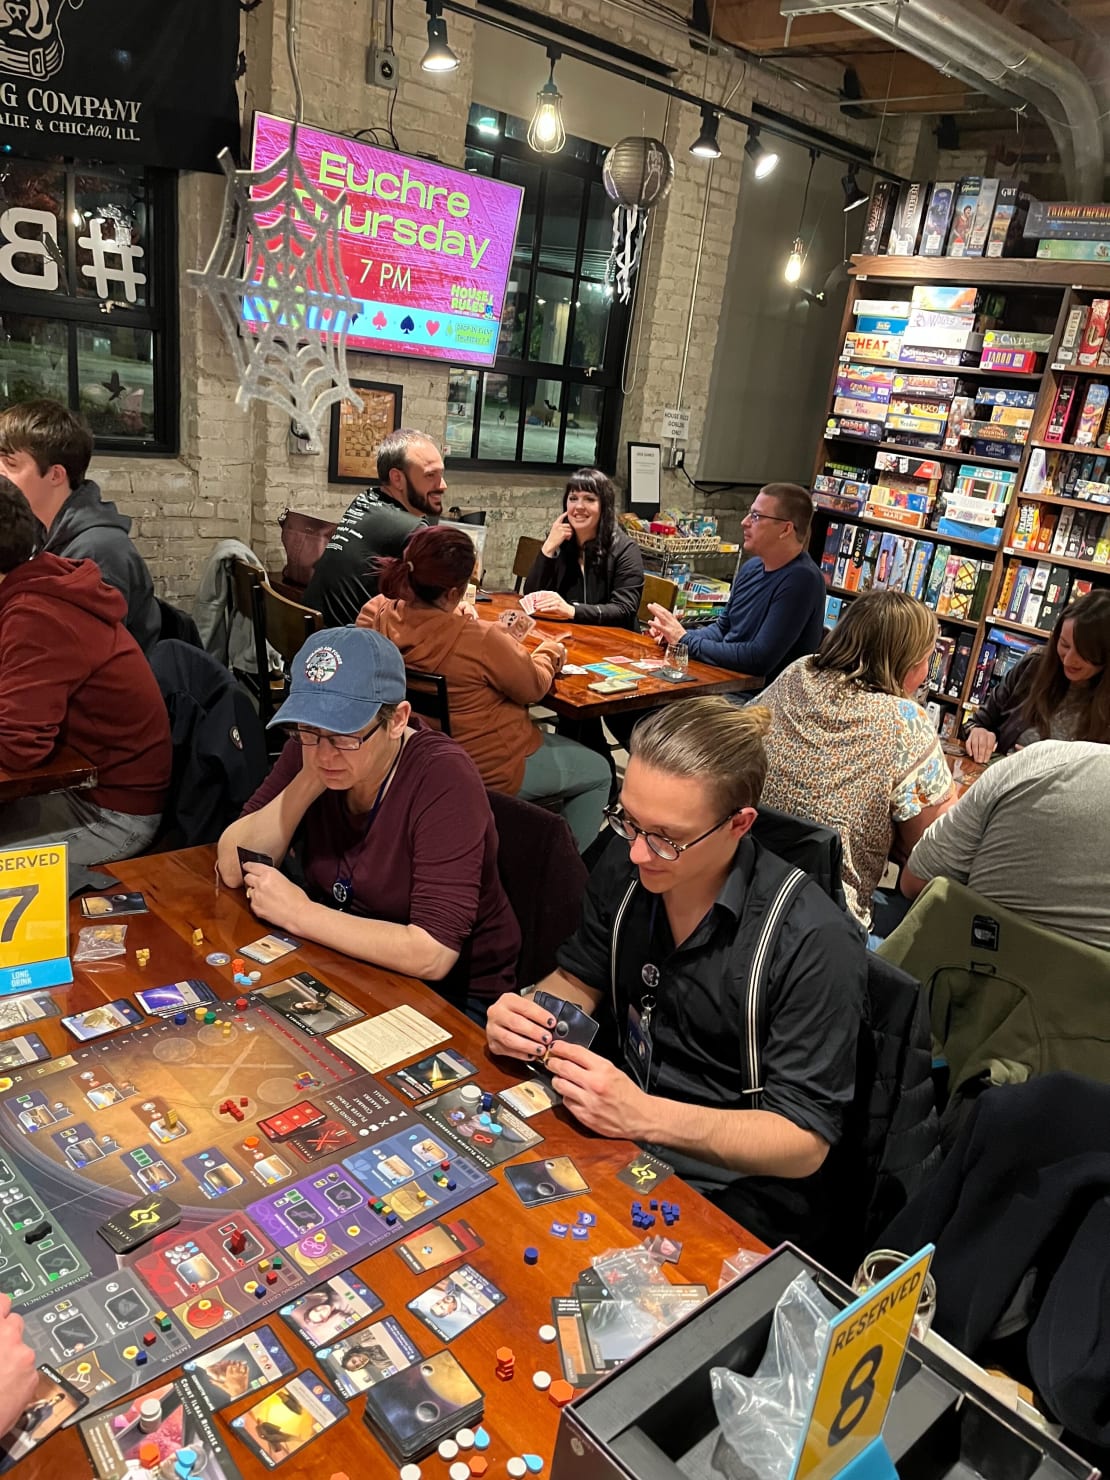 Some people playing board games at a board game lounge